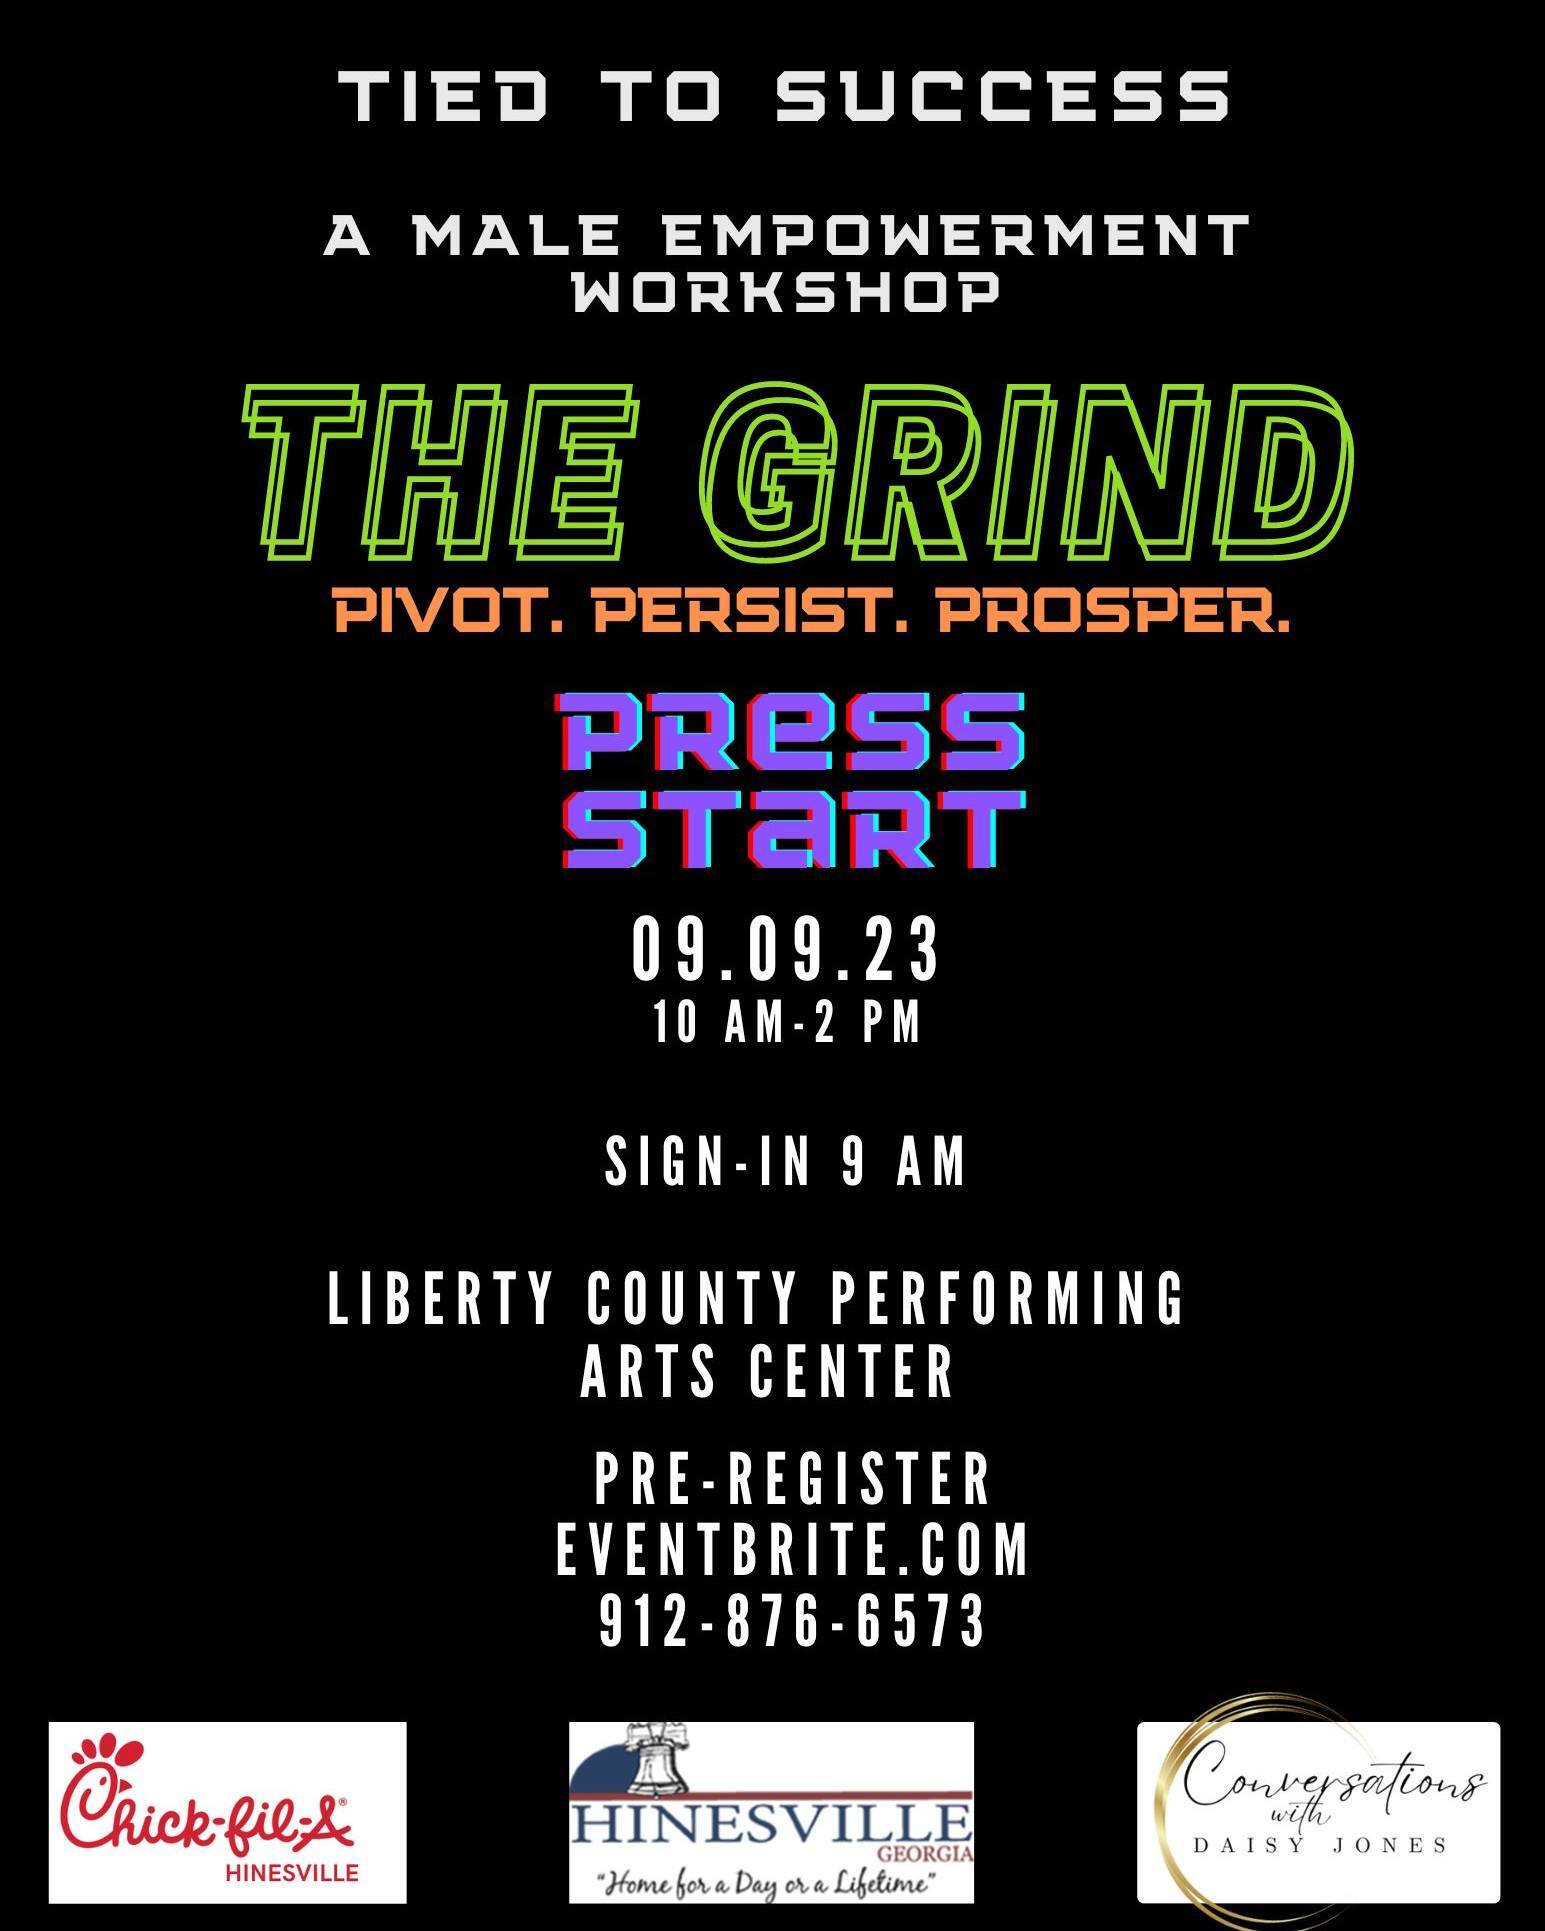 The Grind- A Male Empowerment Workshop